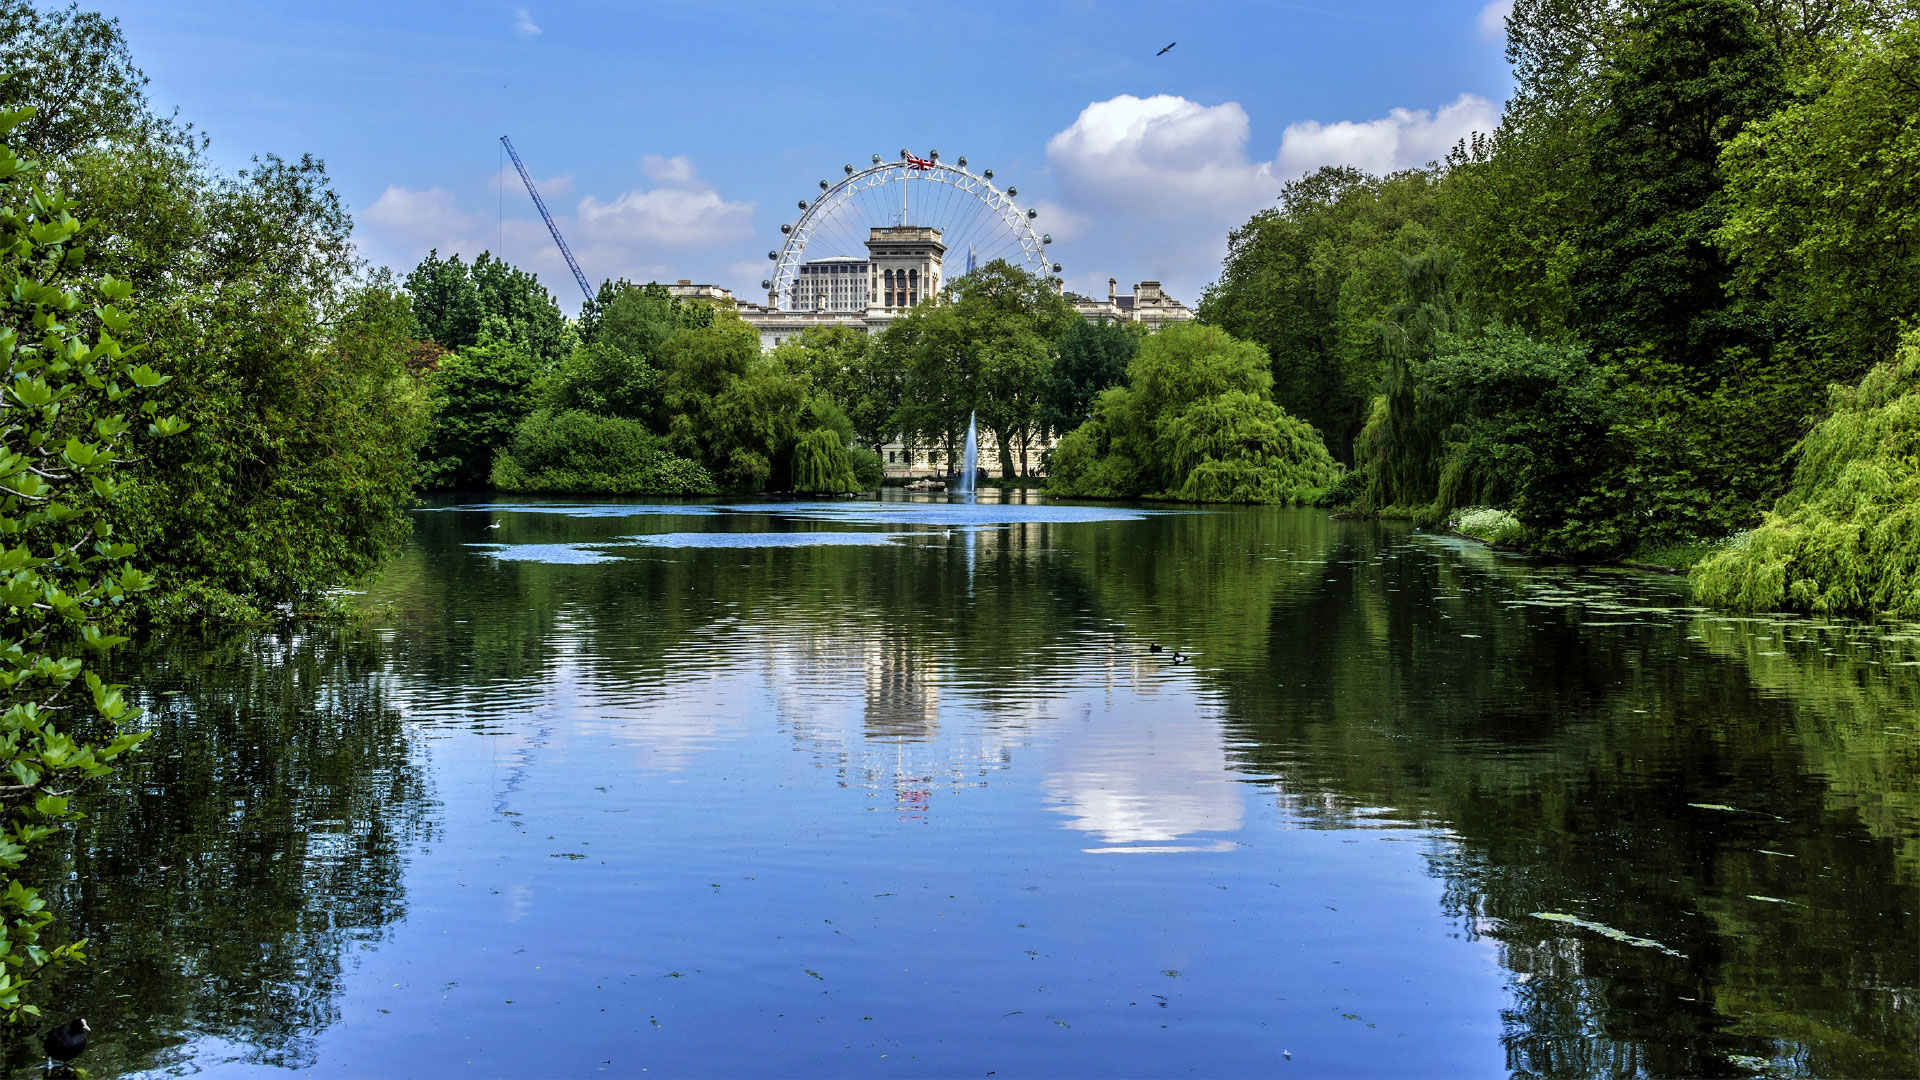 Looking across the lake at St James's Park on a sunny day. The park is lined with green trees, and the London Eye is in the background - all of which are reflecting in the water.